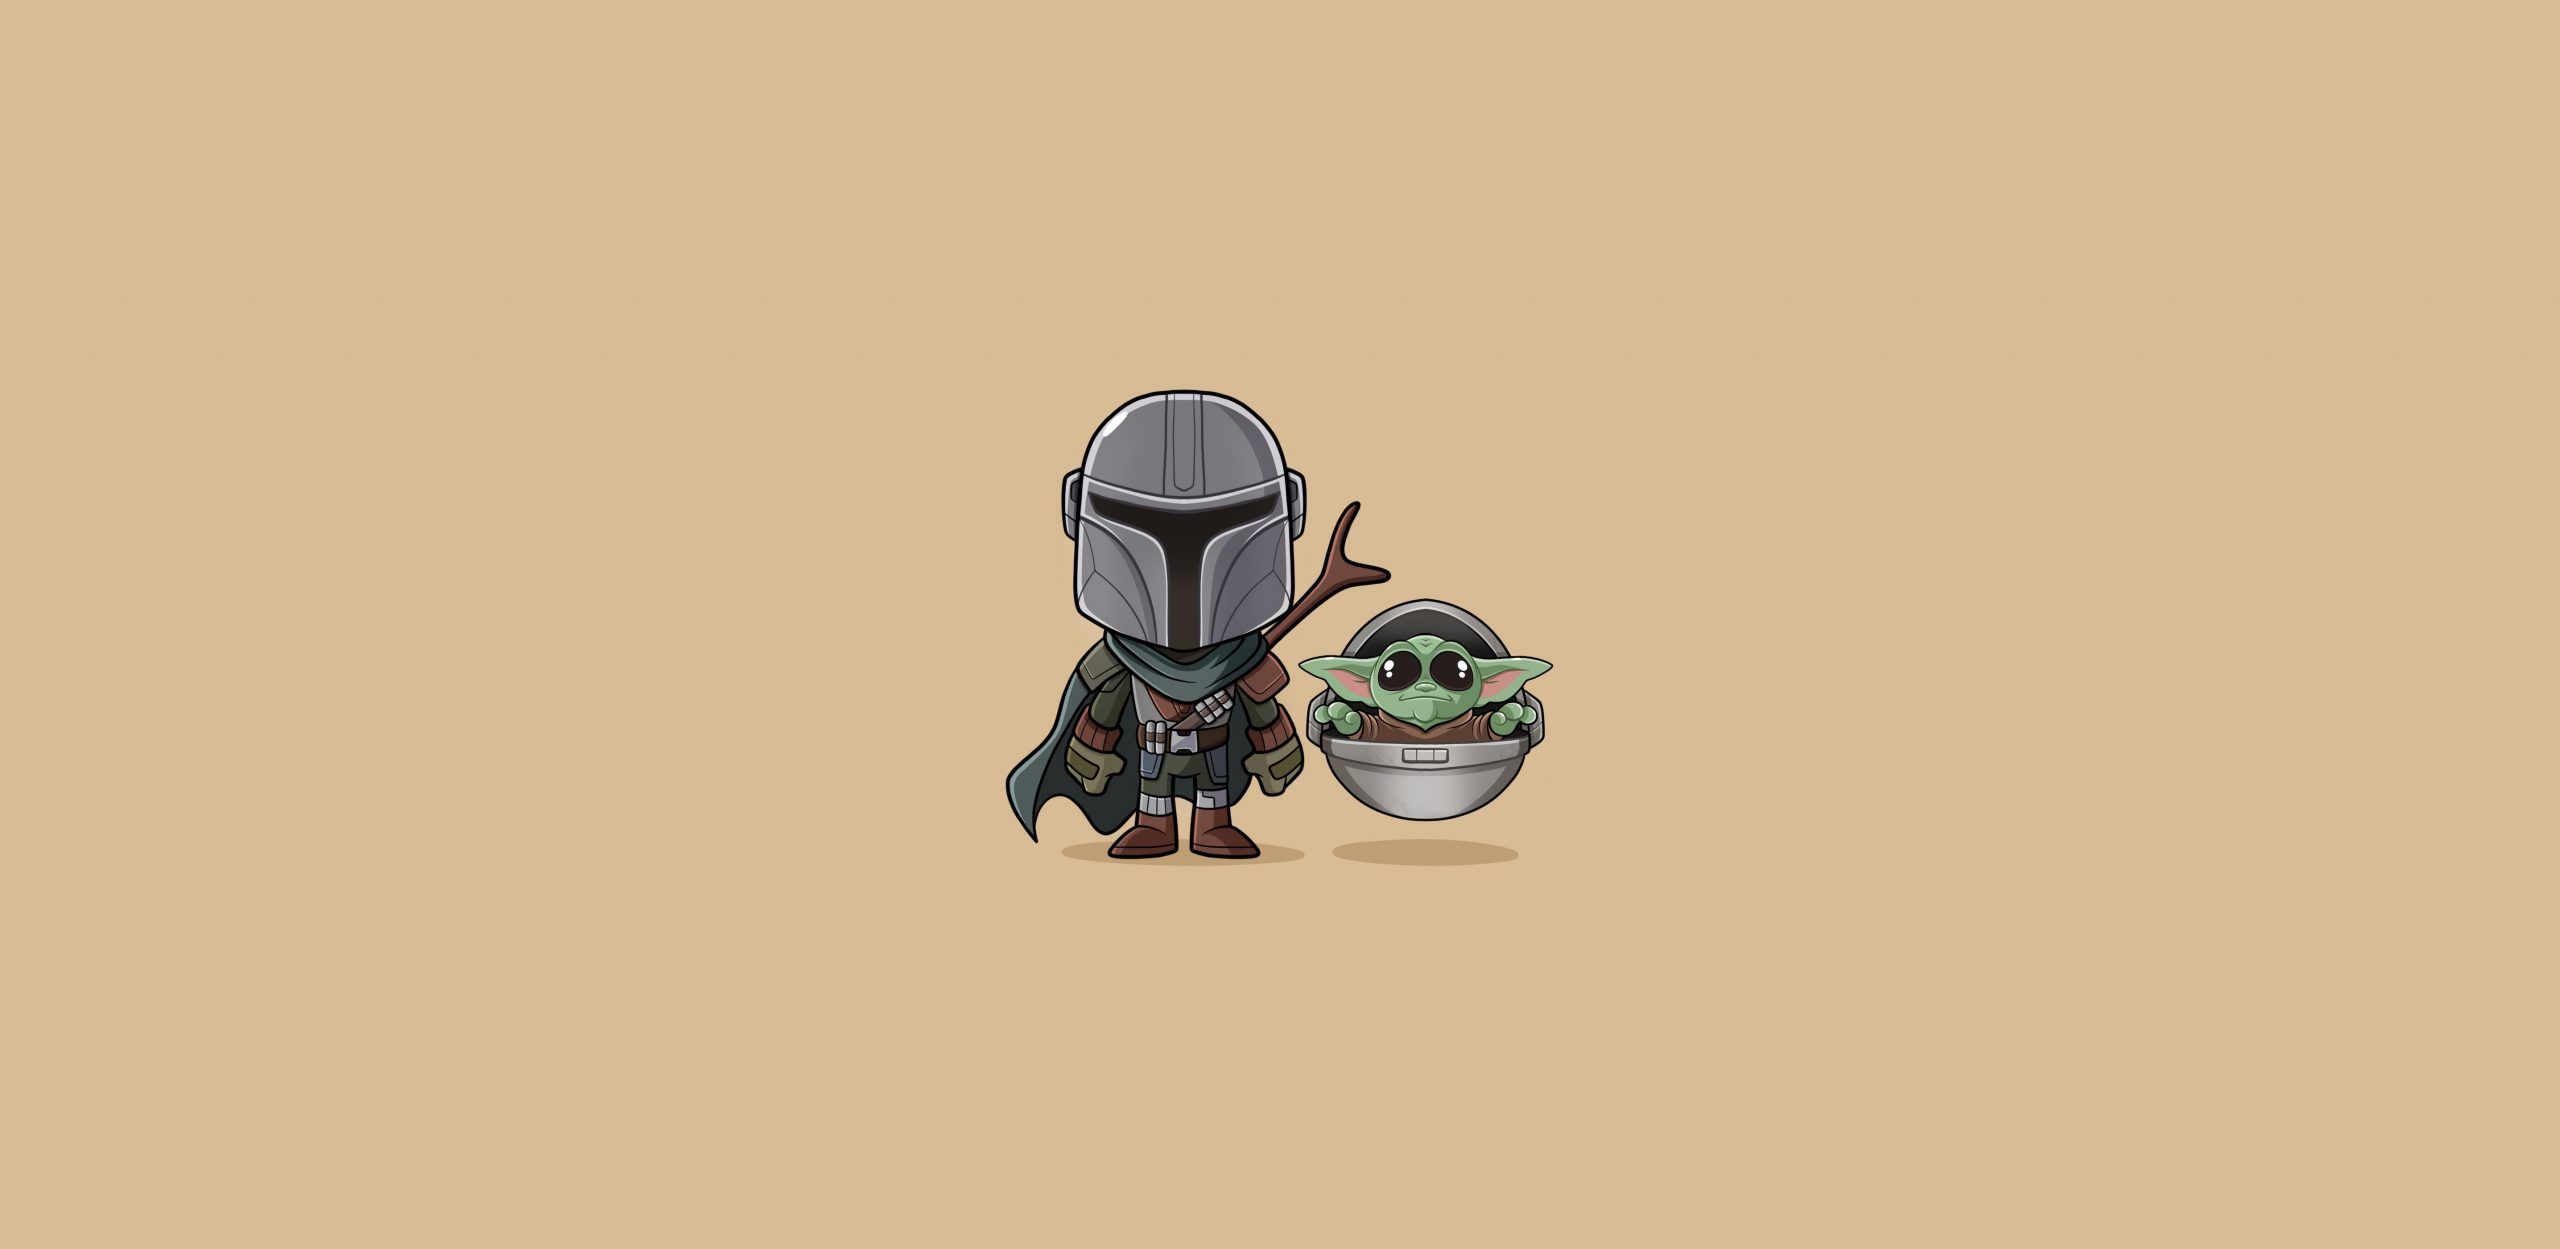 1920x1080 Baby Yoda, The Mandalorian, Star Wars, Minimalism, 2020, HD Movies, 1080p, 2020 movies, wallpaper, backgrounds, images, photos, pictures - Star Wars